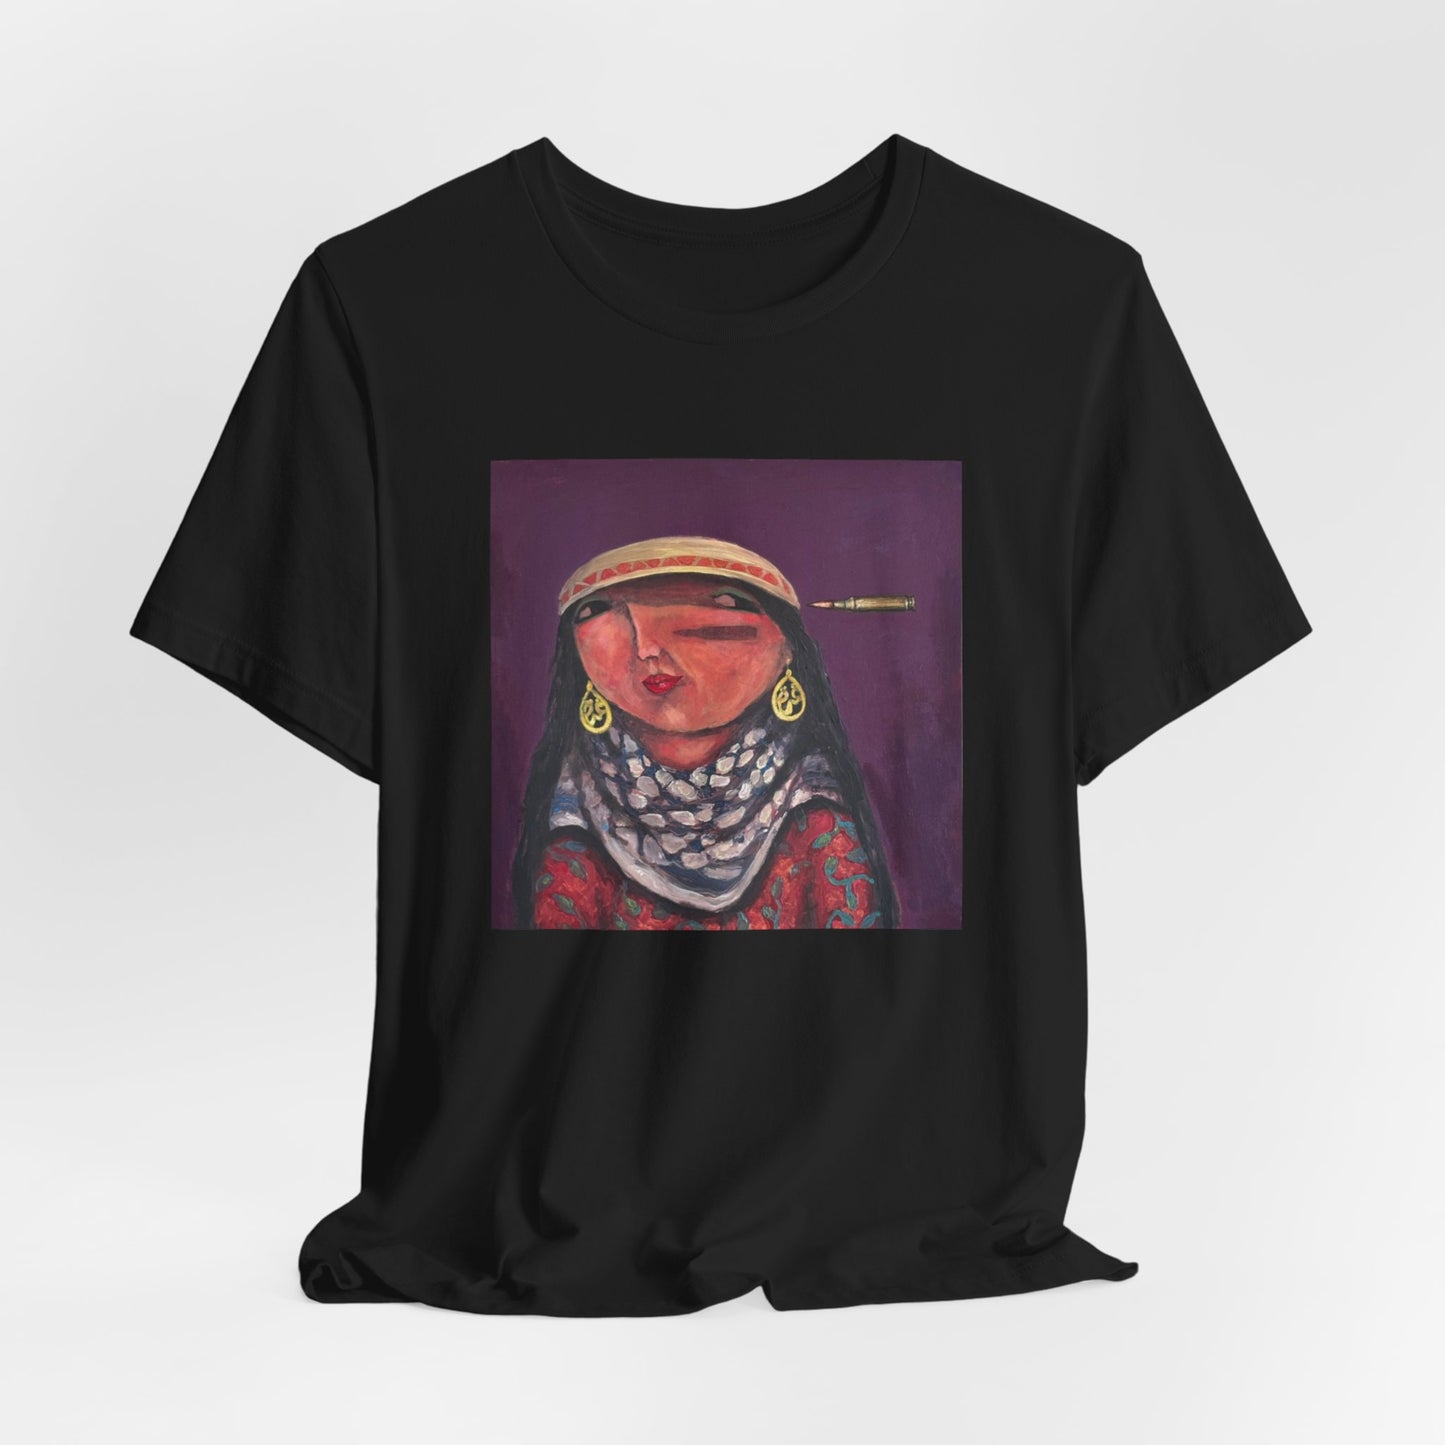 Adult | Support Palestinian Artists | Design By Hamada | Short Sleeve Tee